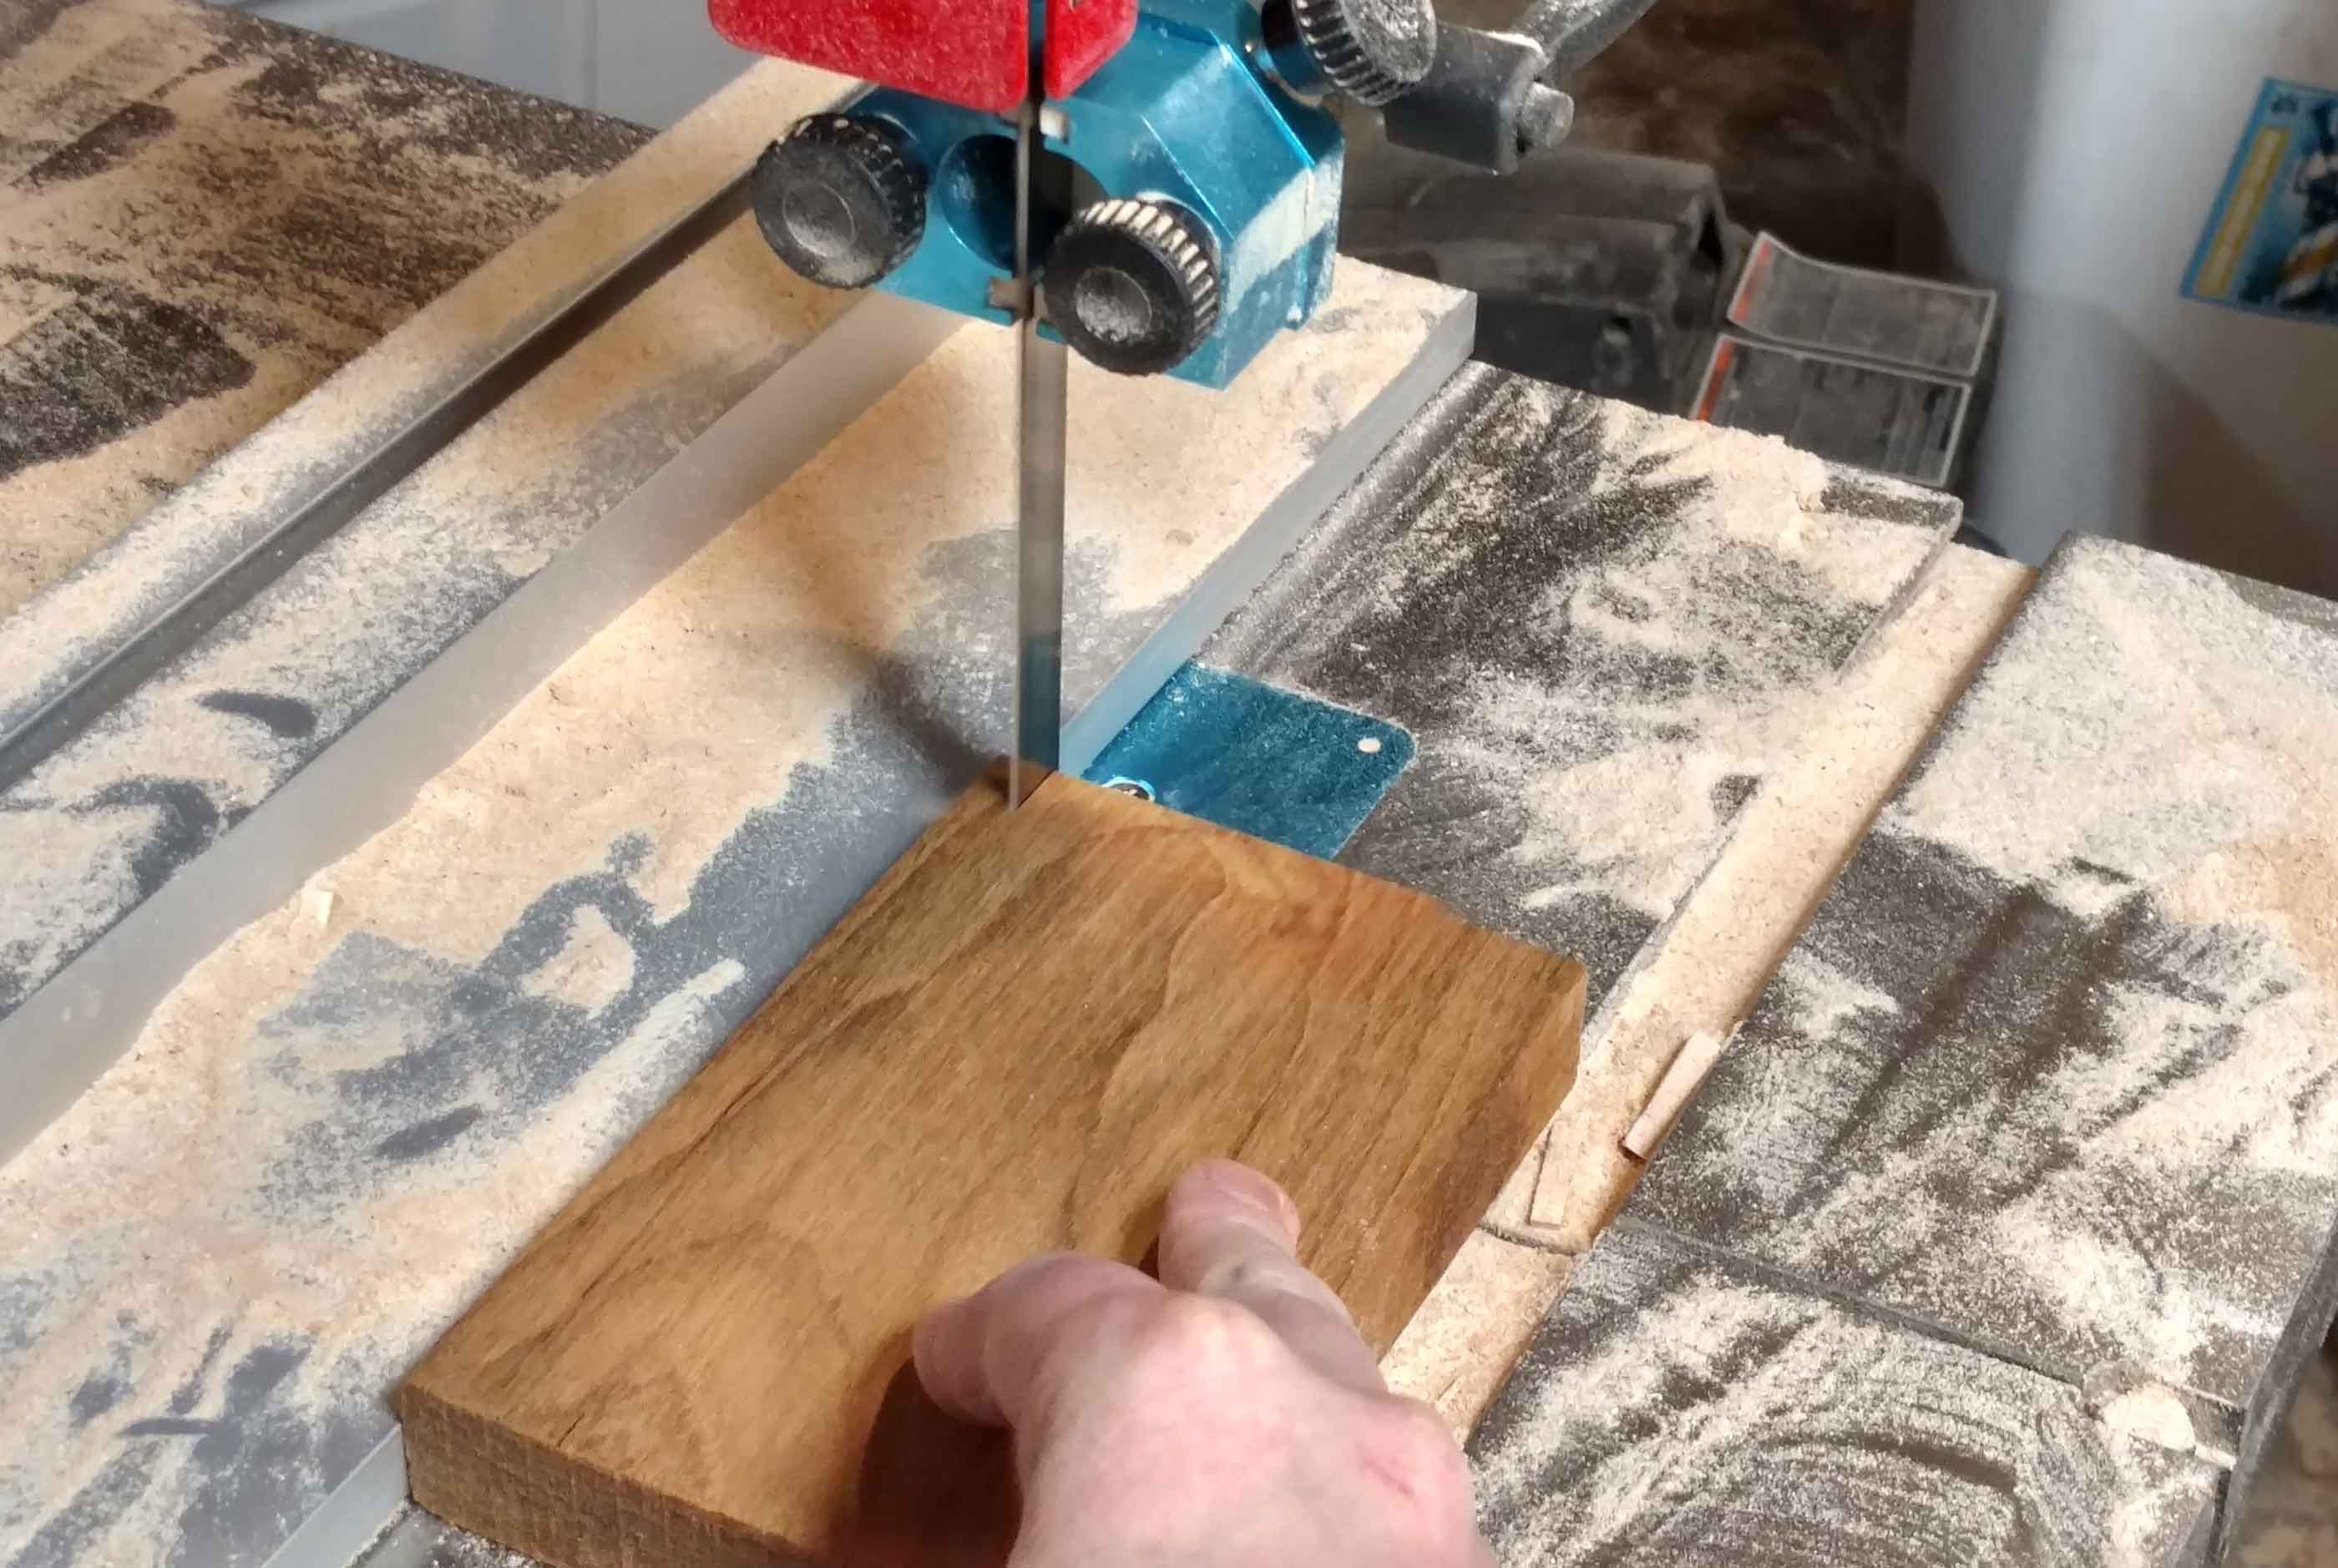 bandsawing out square dowel blanks